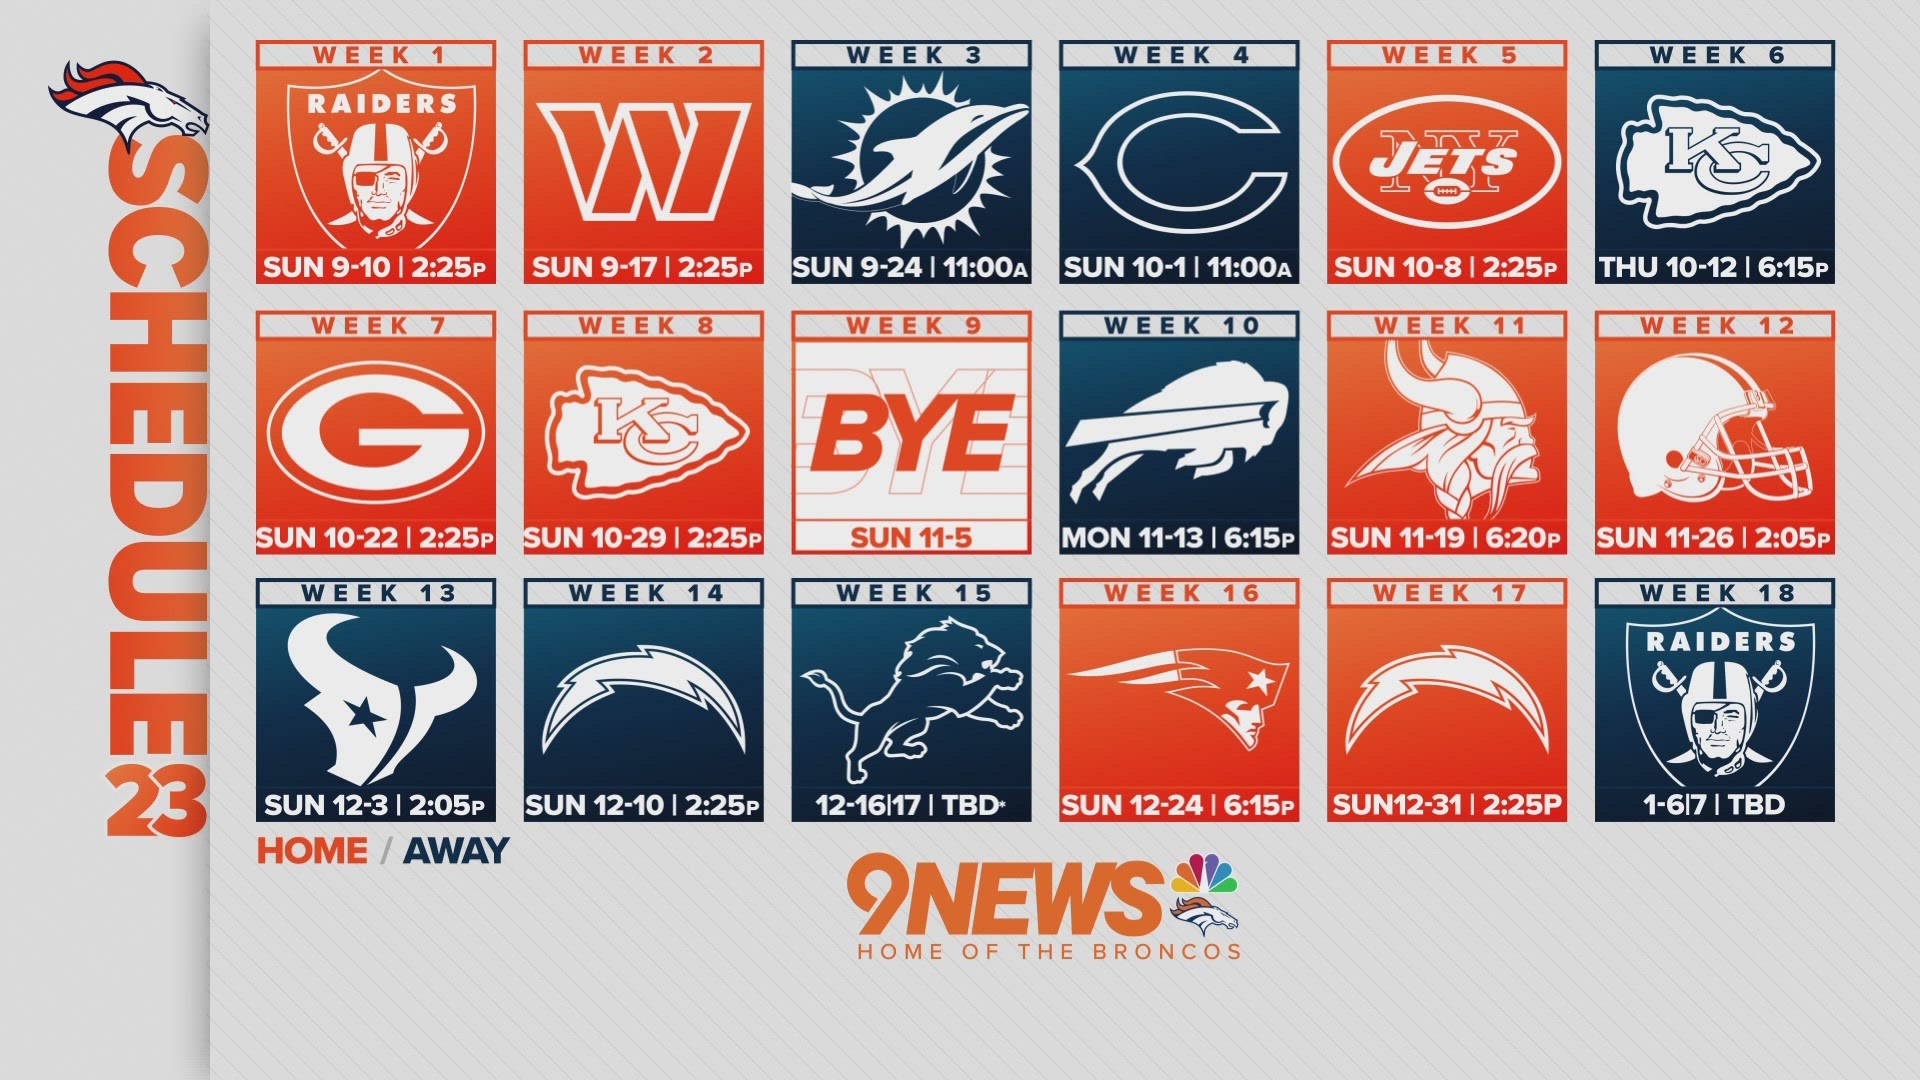 Despite last year's 5-12 record, the Denver Broncos have four scheduled primetime games and a chance for two more.